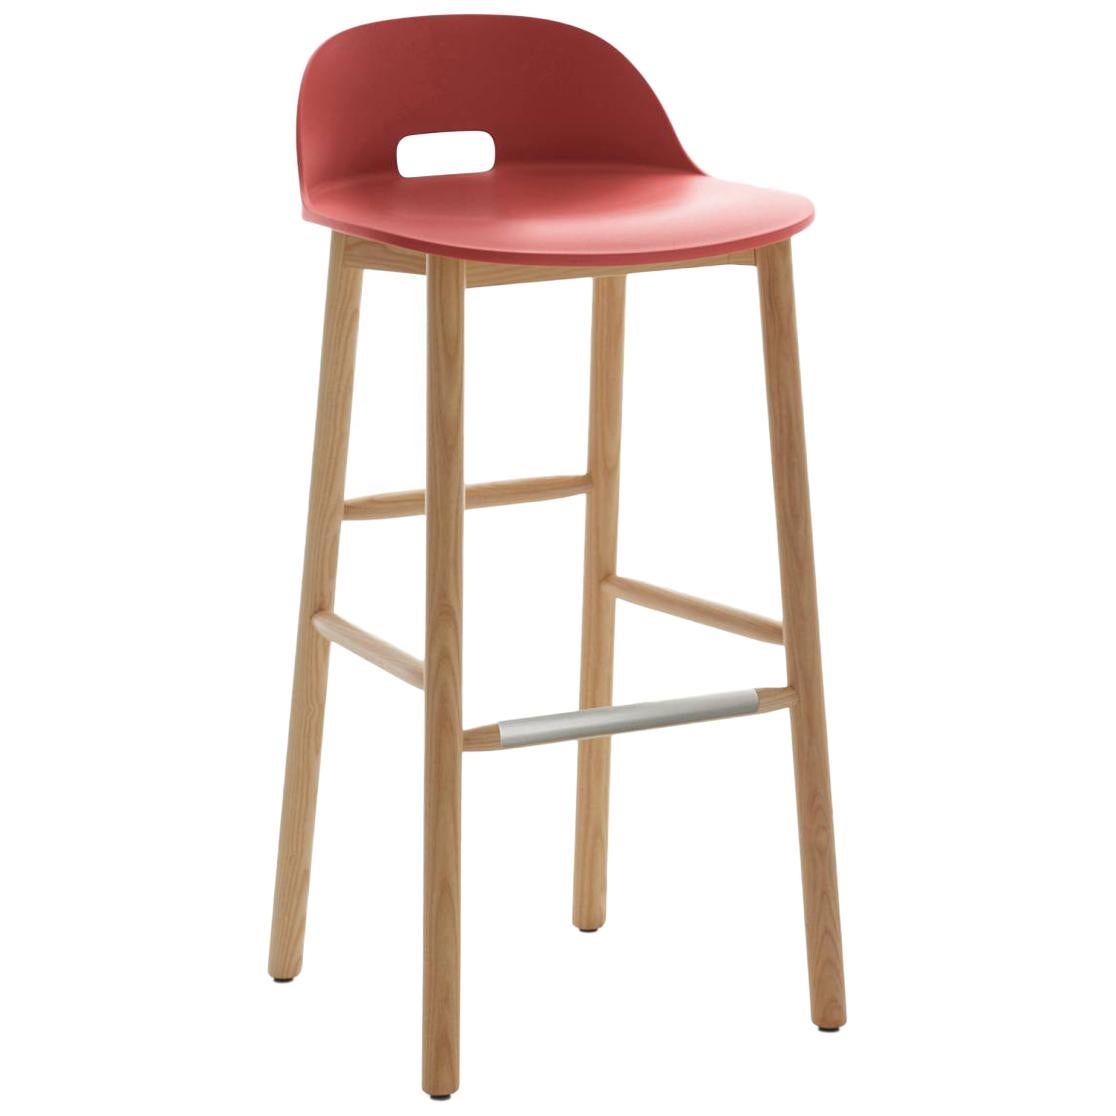 Emeco Alfi Barstool in Red and Ash with Low Back by Jasper Morrison